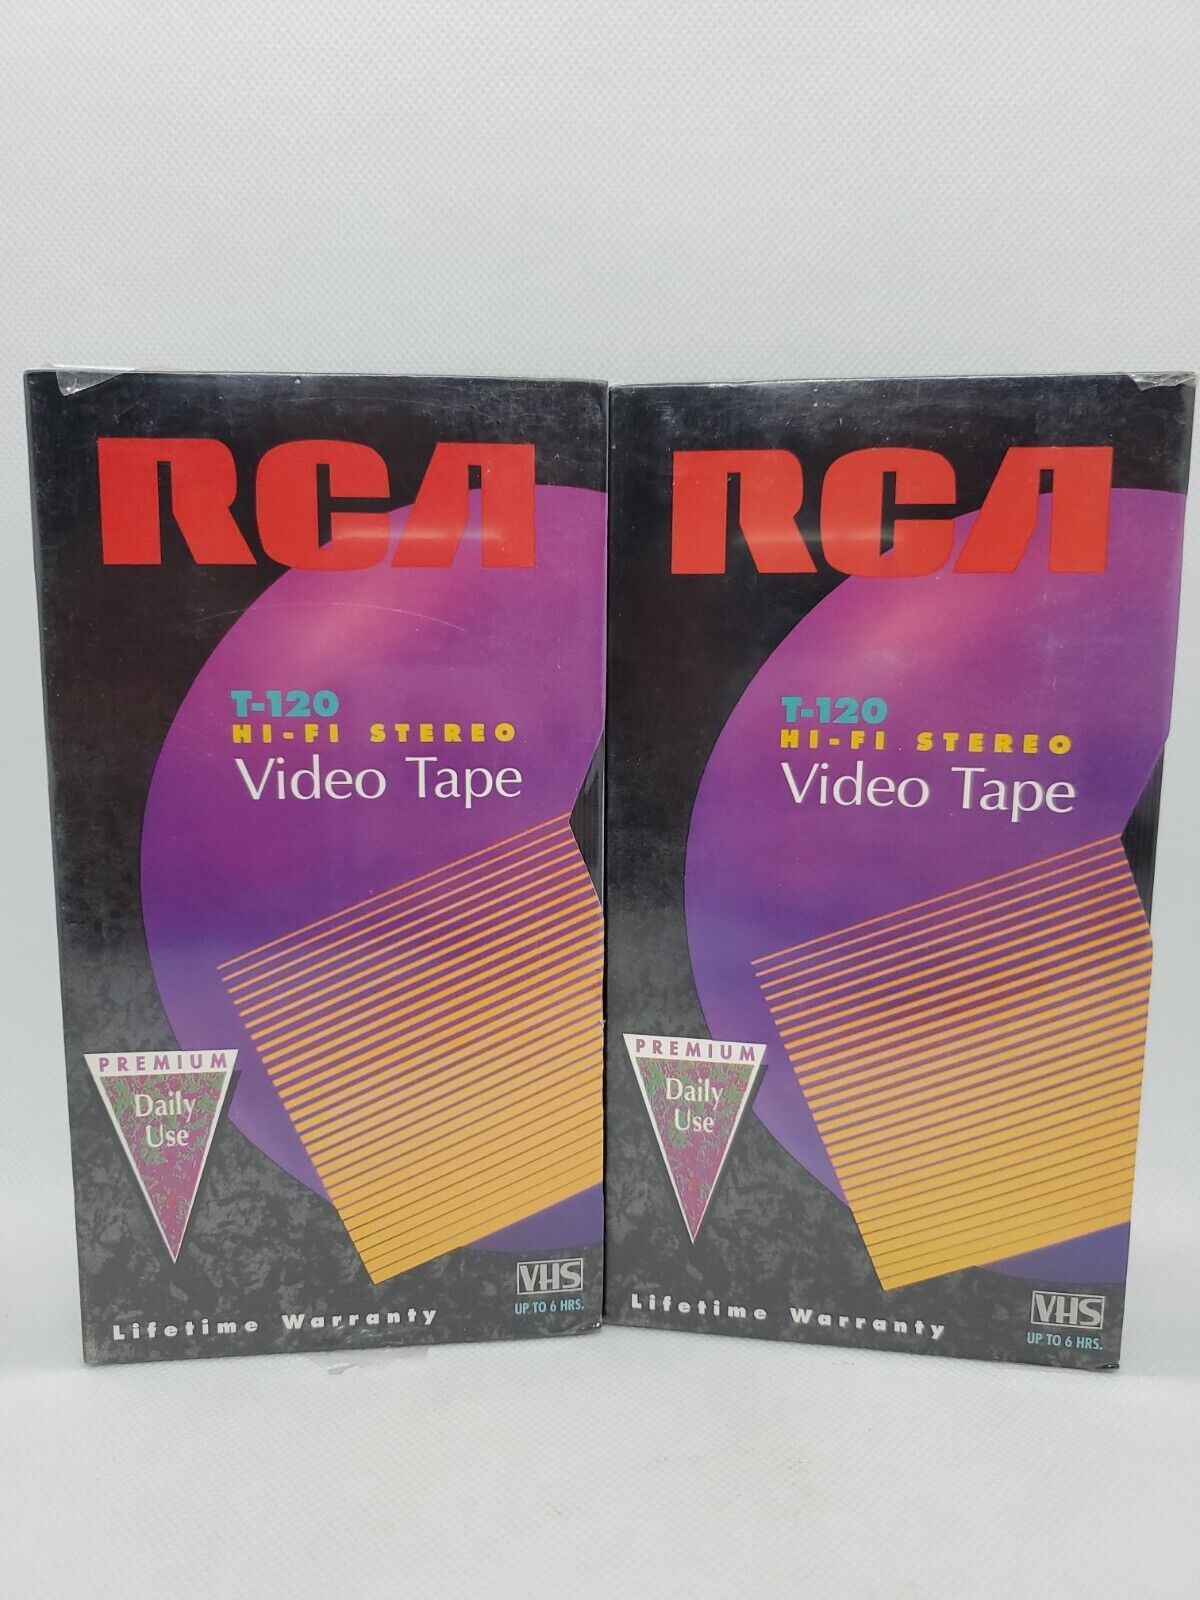 Lot of 2 RCA T120 Video Cassette Tape VHS Sealed Premium Up To 6 Hrs Hi-Fi - $11.88